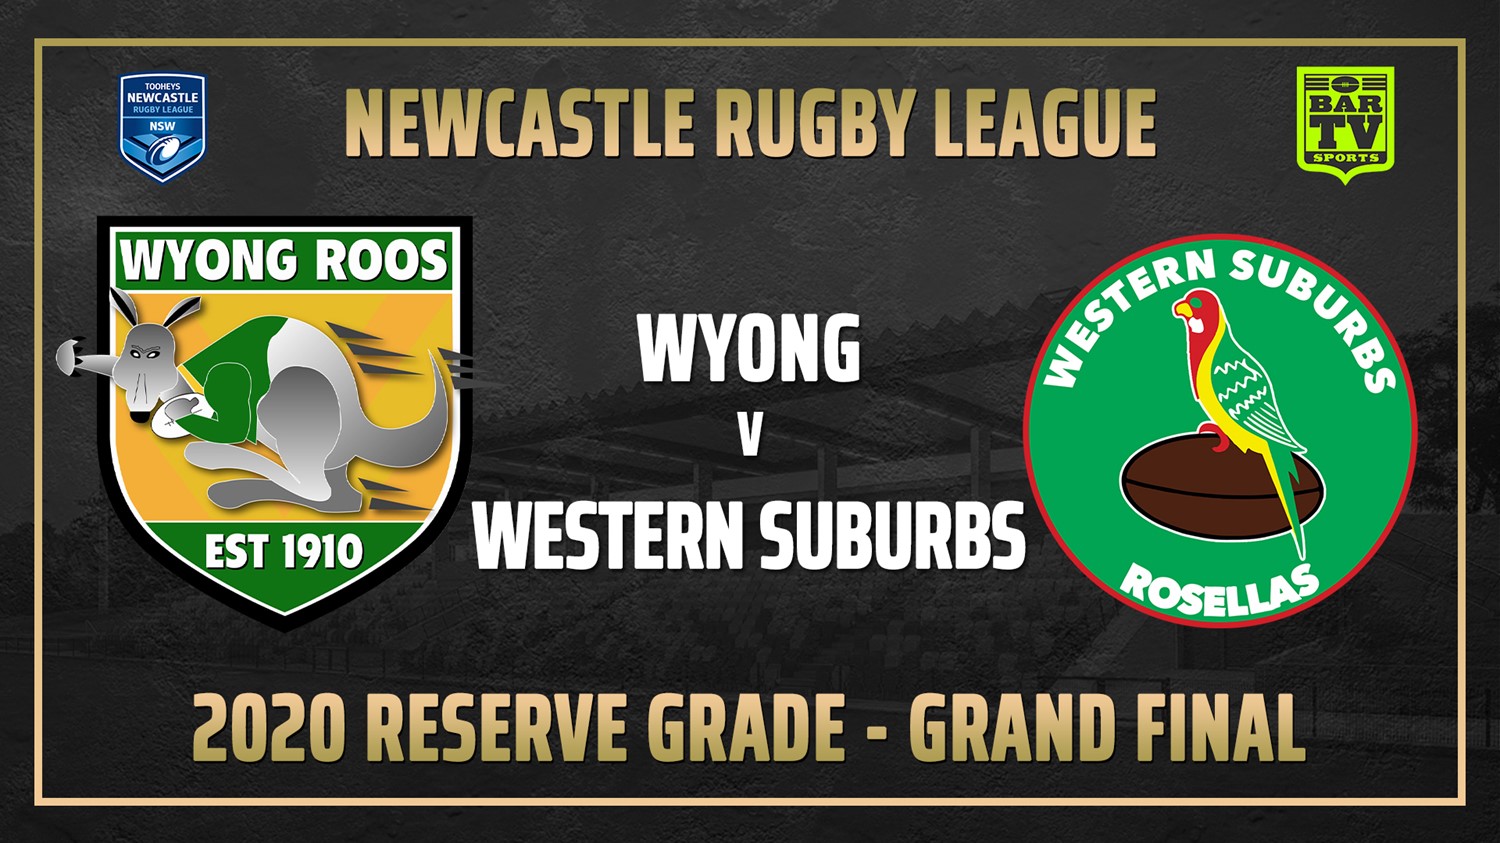 Newcastle Rugby League Grand Final - Reserves Grade - Wyong Roos v Western Suburbs Rosellas Slate Image